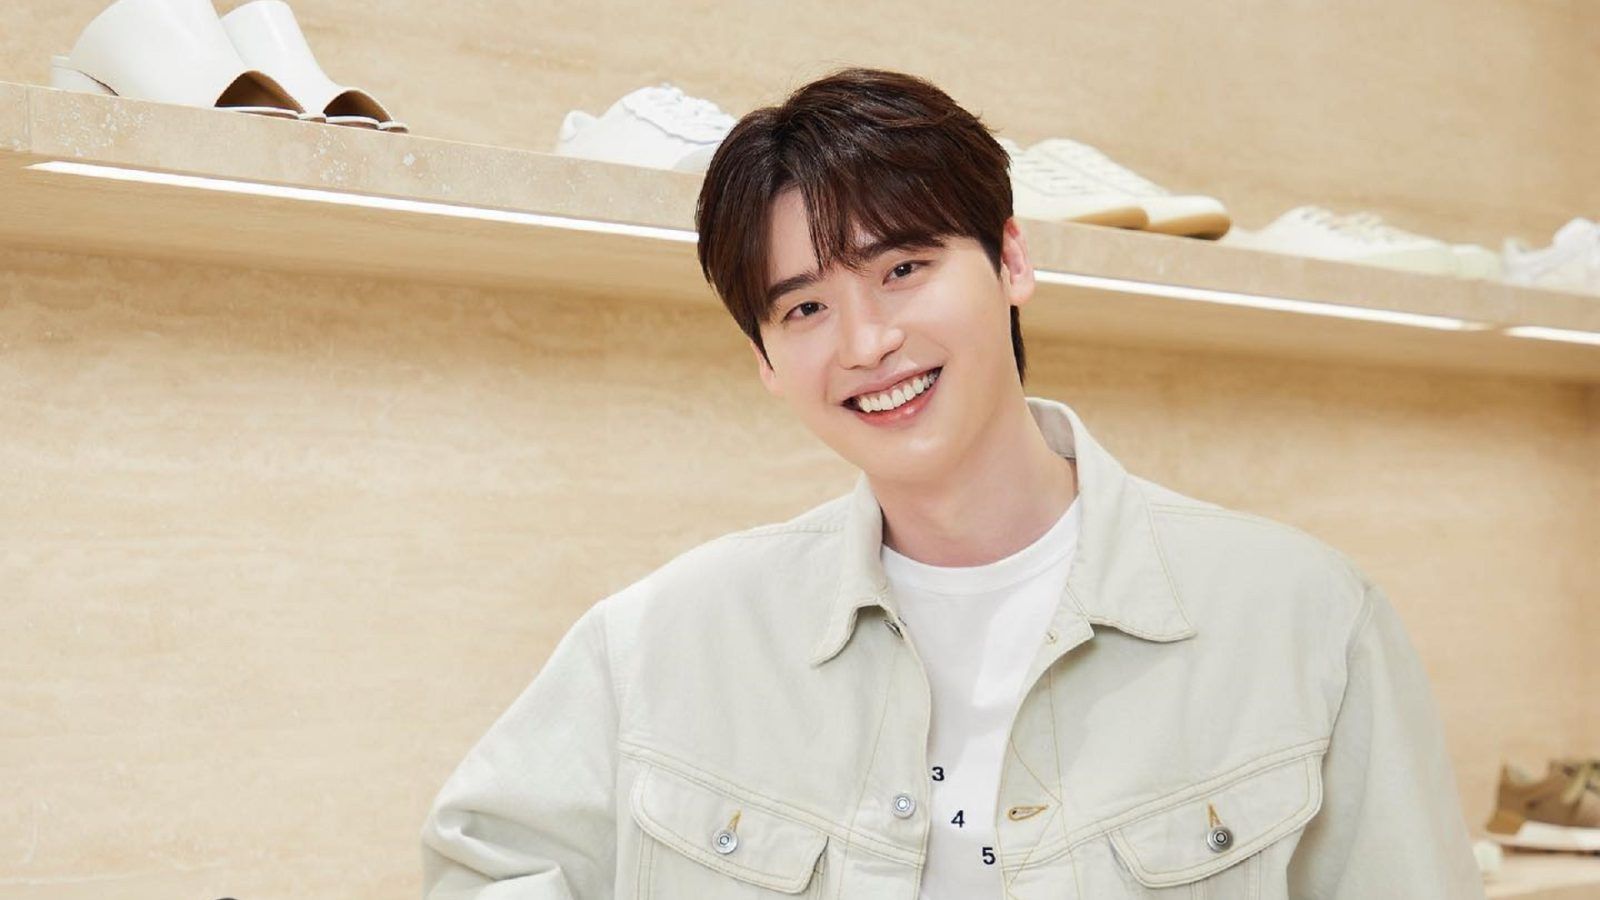 Lee Jong Suk Angel0206 on Twitter This is absolutely gorgeous From  his long hair His eyes His nose And that perfect lips Omg Lee  Jong Sukyoure killing me LeeJongSuk is so perfect